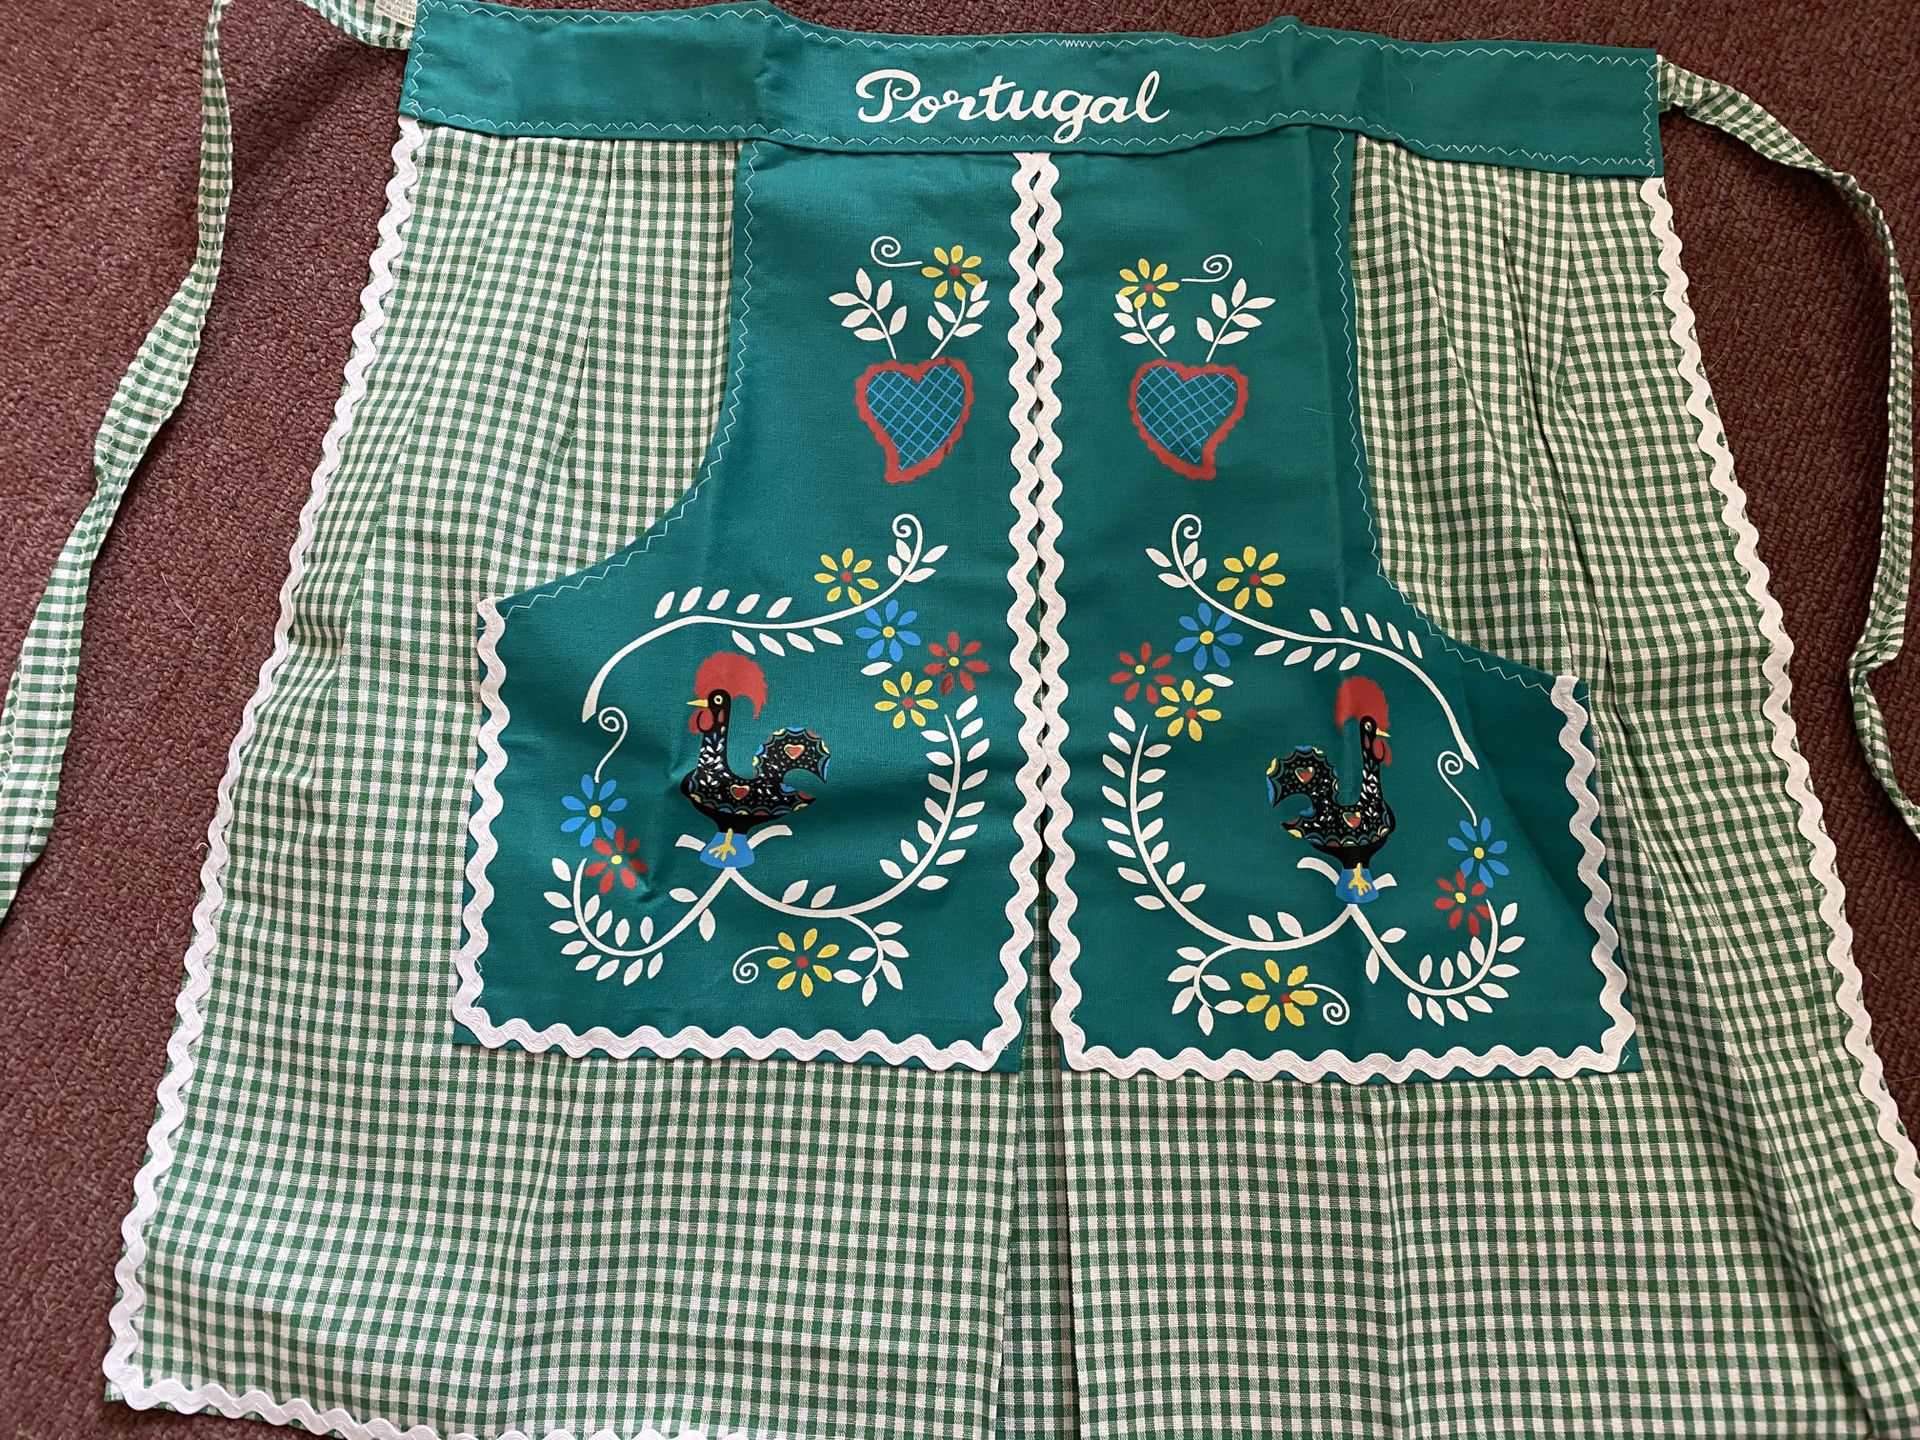 SET OF SOUVENIR OVEN MITTS, APRONS, AND DISH CLOTH BRAND NEW AND NEVER USED KITCHEN ACCESSORIES